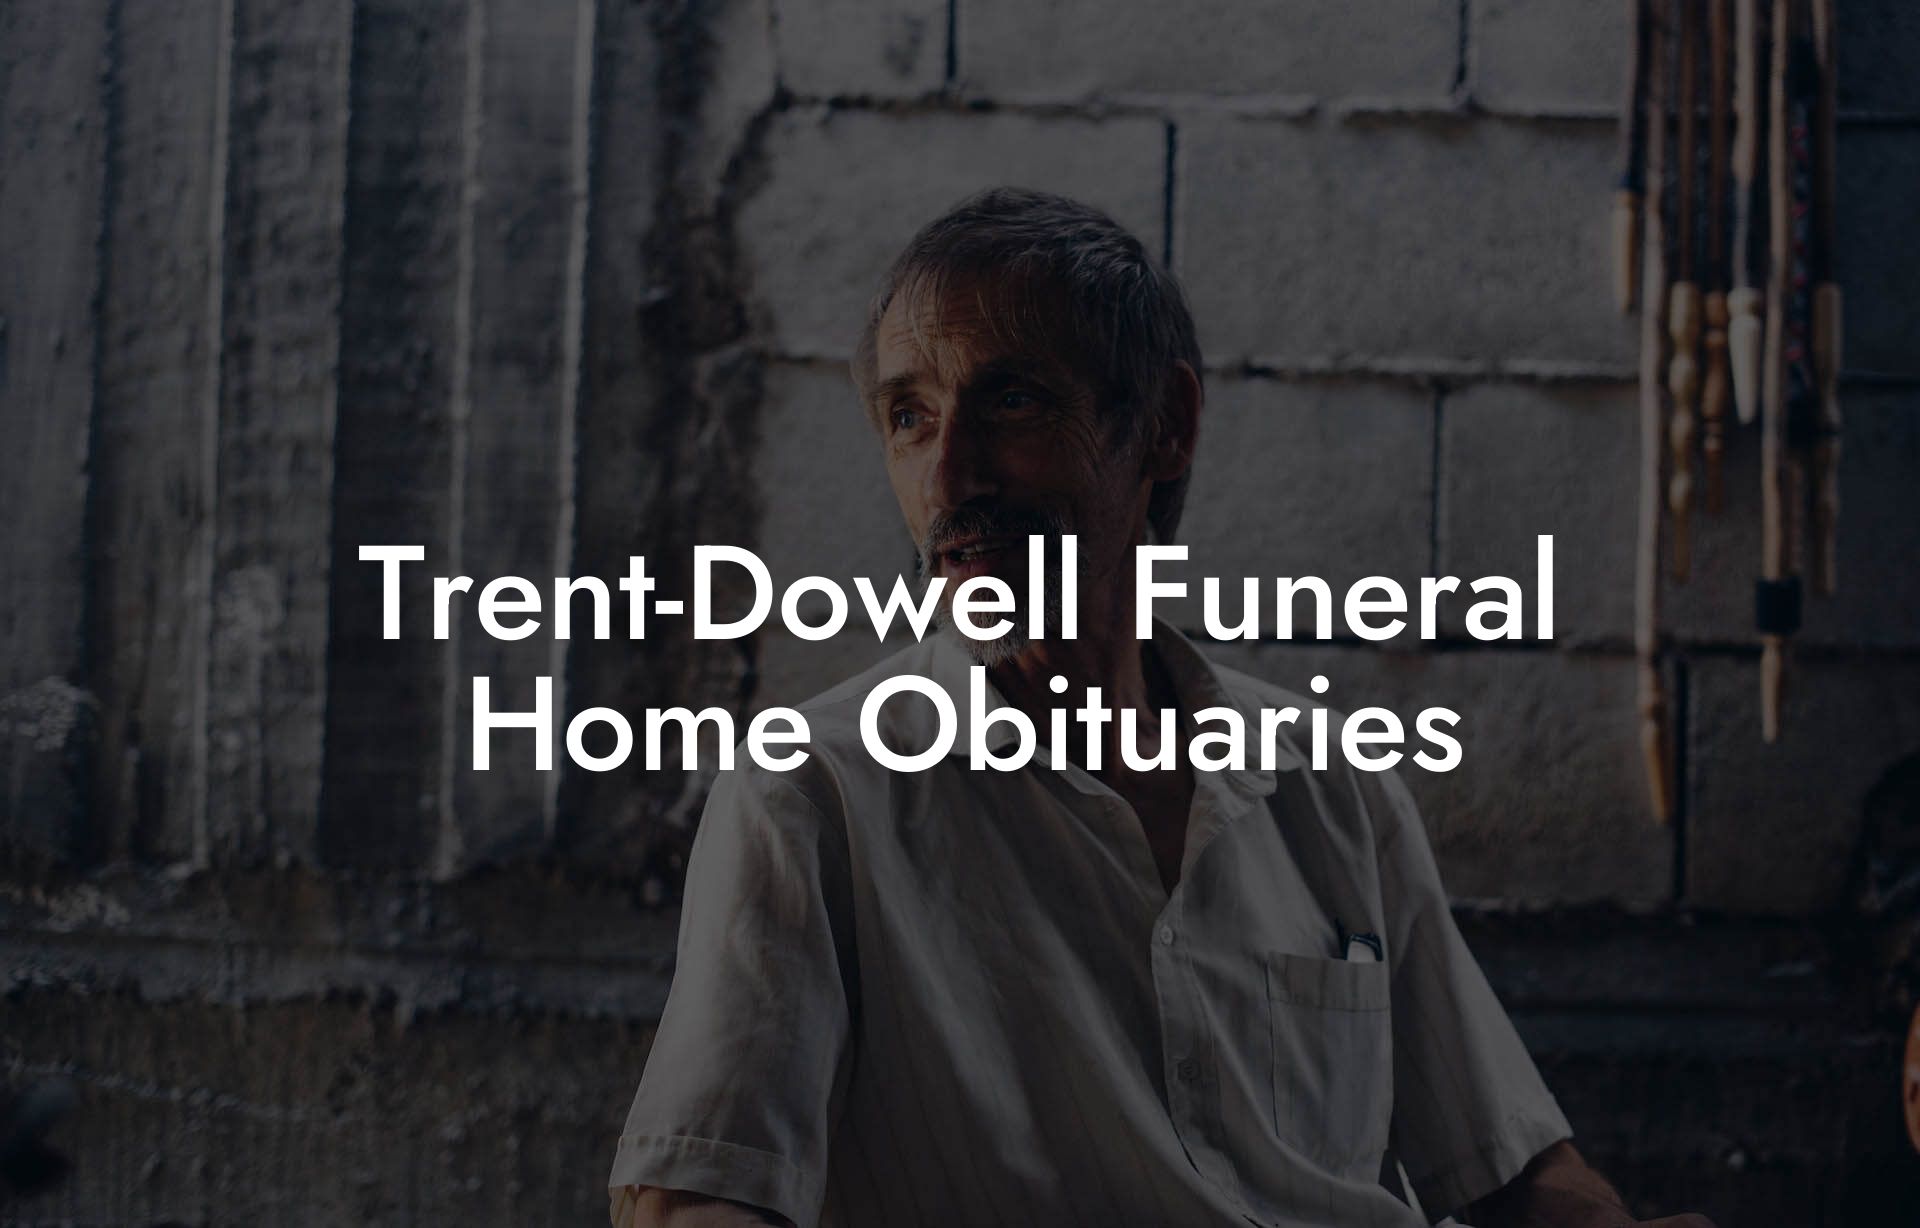 Trent-Dowell Funeral Home Obituaries